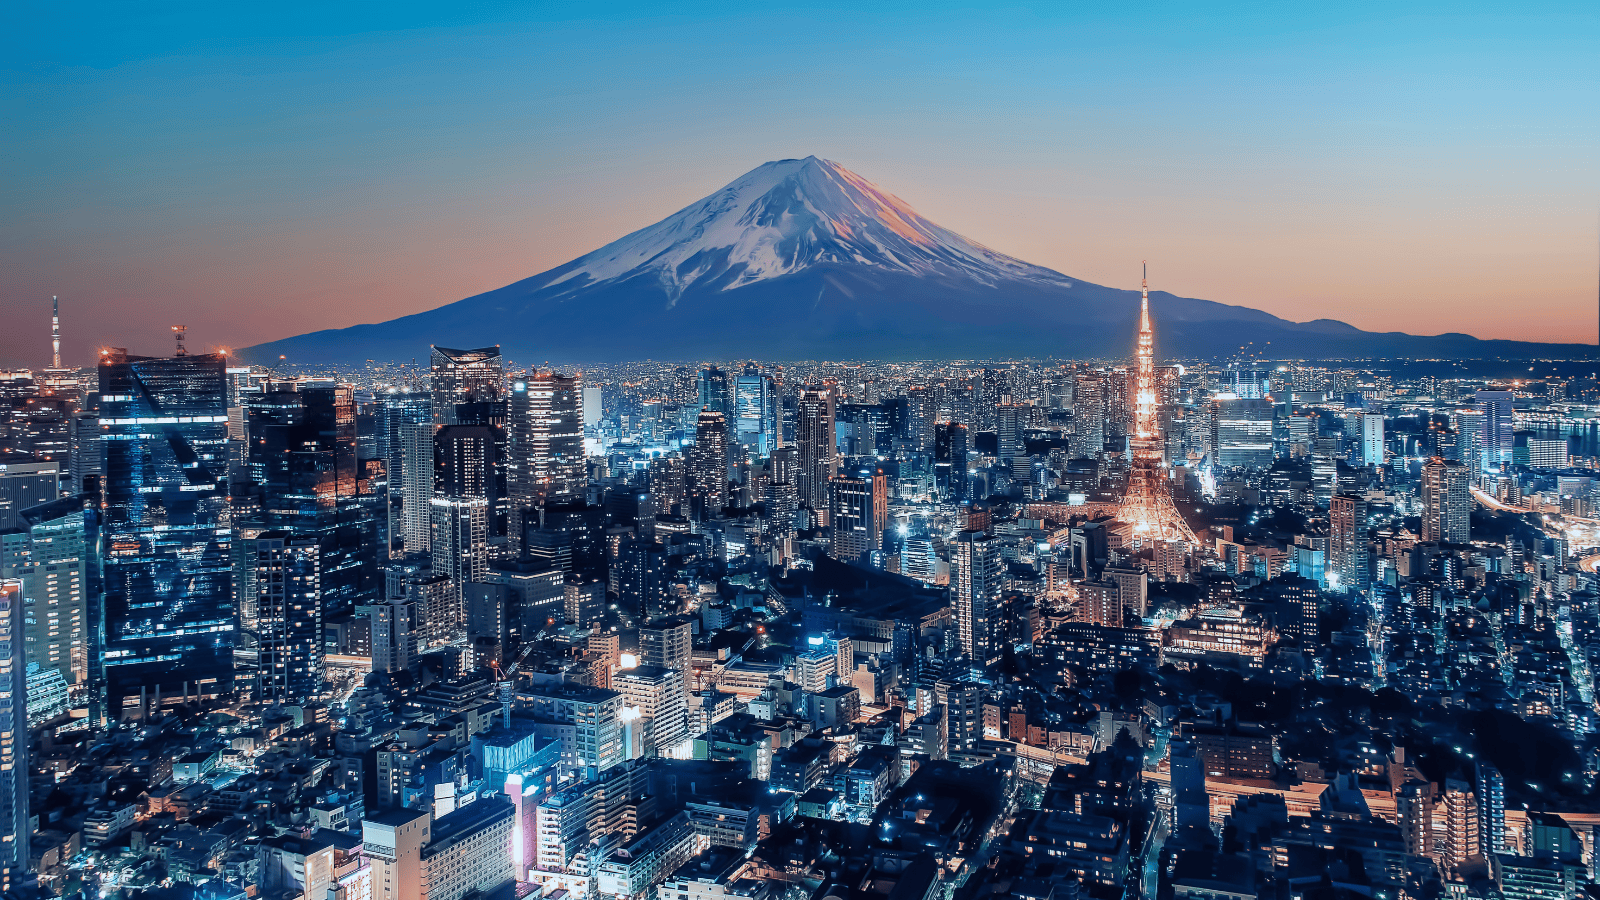 <p><a href="https://whatthefab.com/what-to-do-in-tokyo.html" rel="follow">Tokyo</a> and Dubai are known for their diverse populations and advanced technological accomplishments. They offer world-class tourism for visitors of all ages.</p><p>Tokyo is an unbeatable destination for urban explorers. Its vibrant city life and sightseeing opportunities make it a great place for foreigners to enjoy the fast-paced atmosphere day and night.</p>